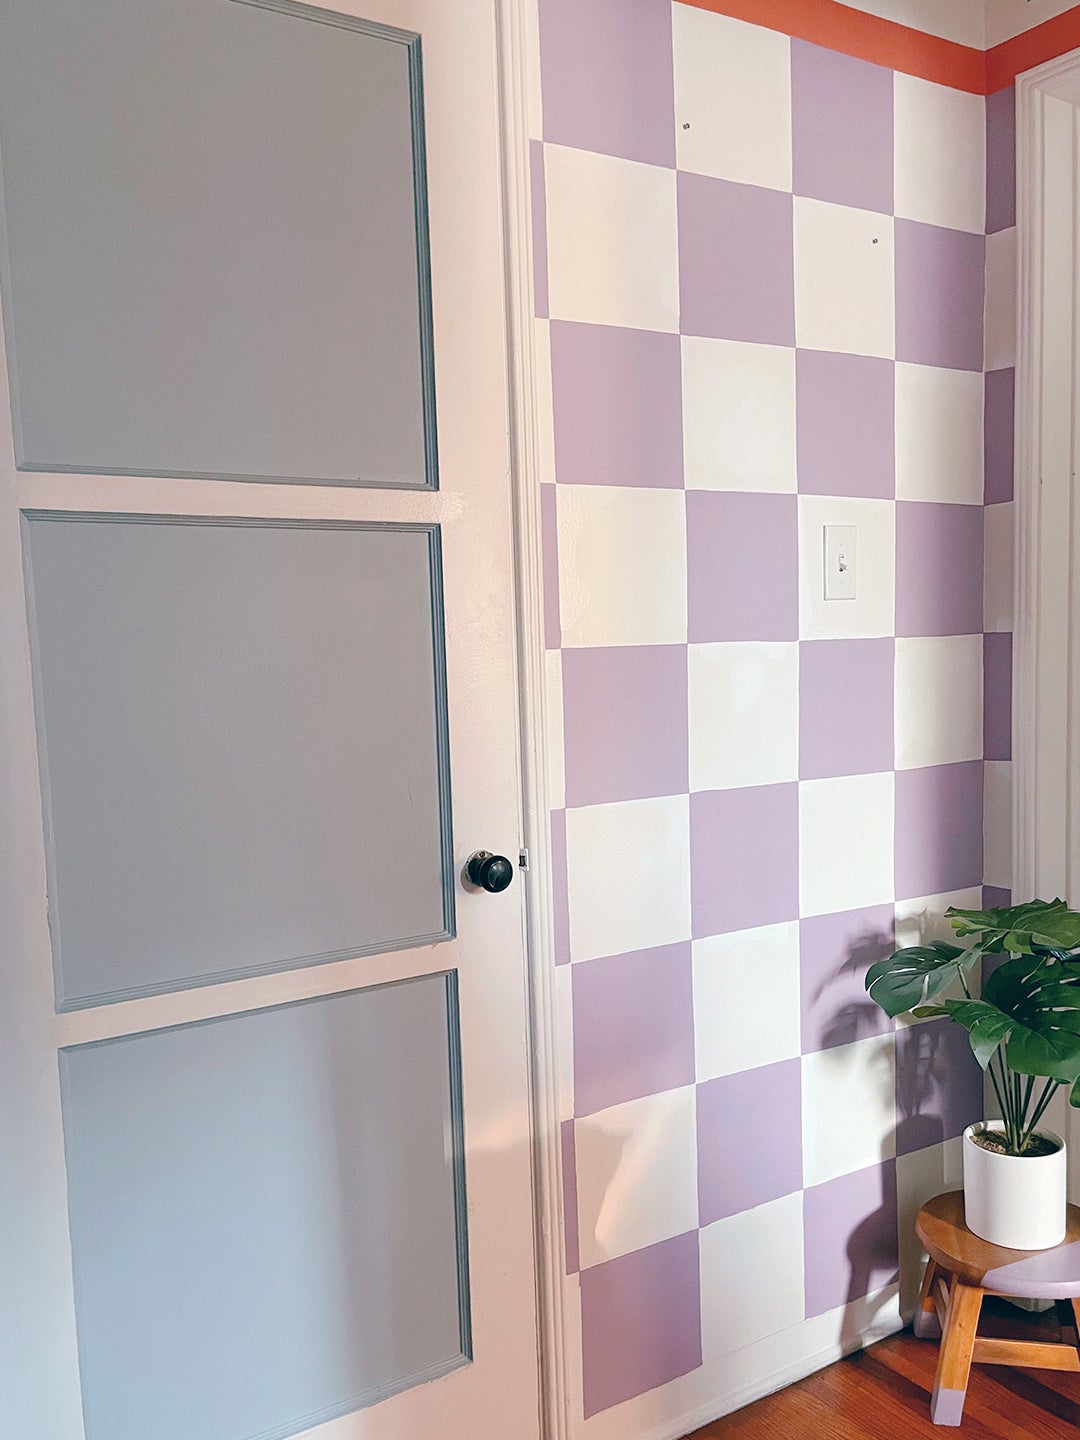 An $8 Home Depot Buy Was Pivotal to This Lopsided Hallway’s Checkered Mural